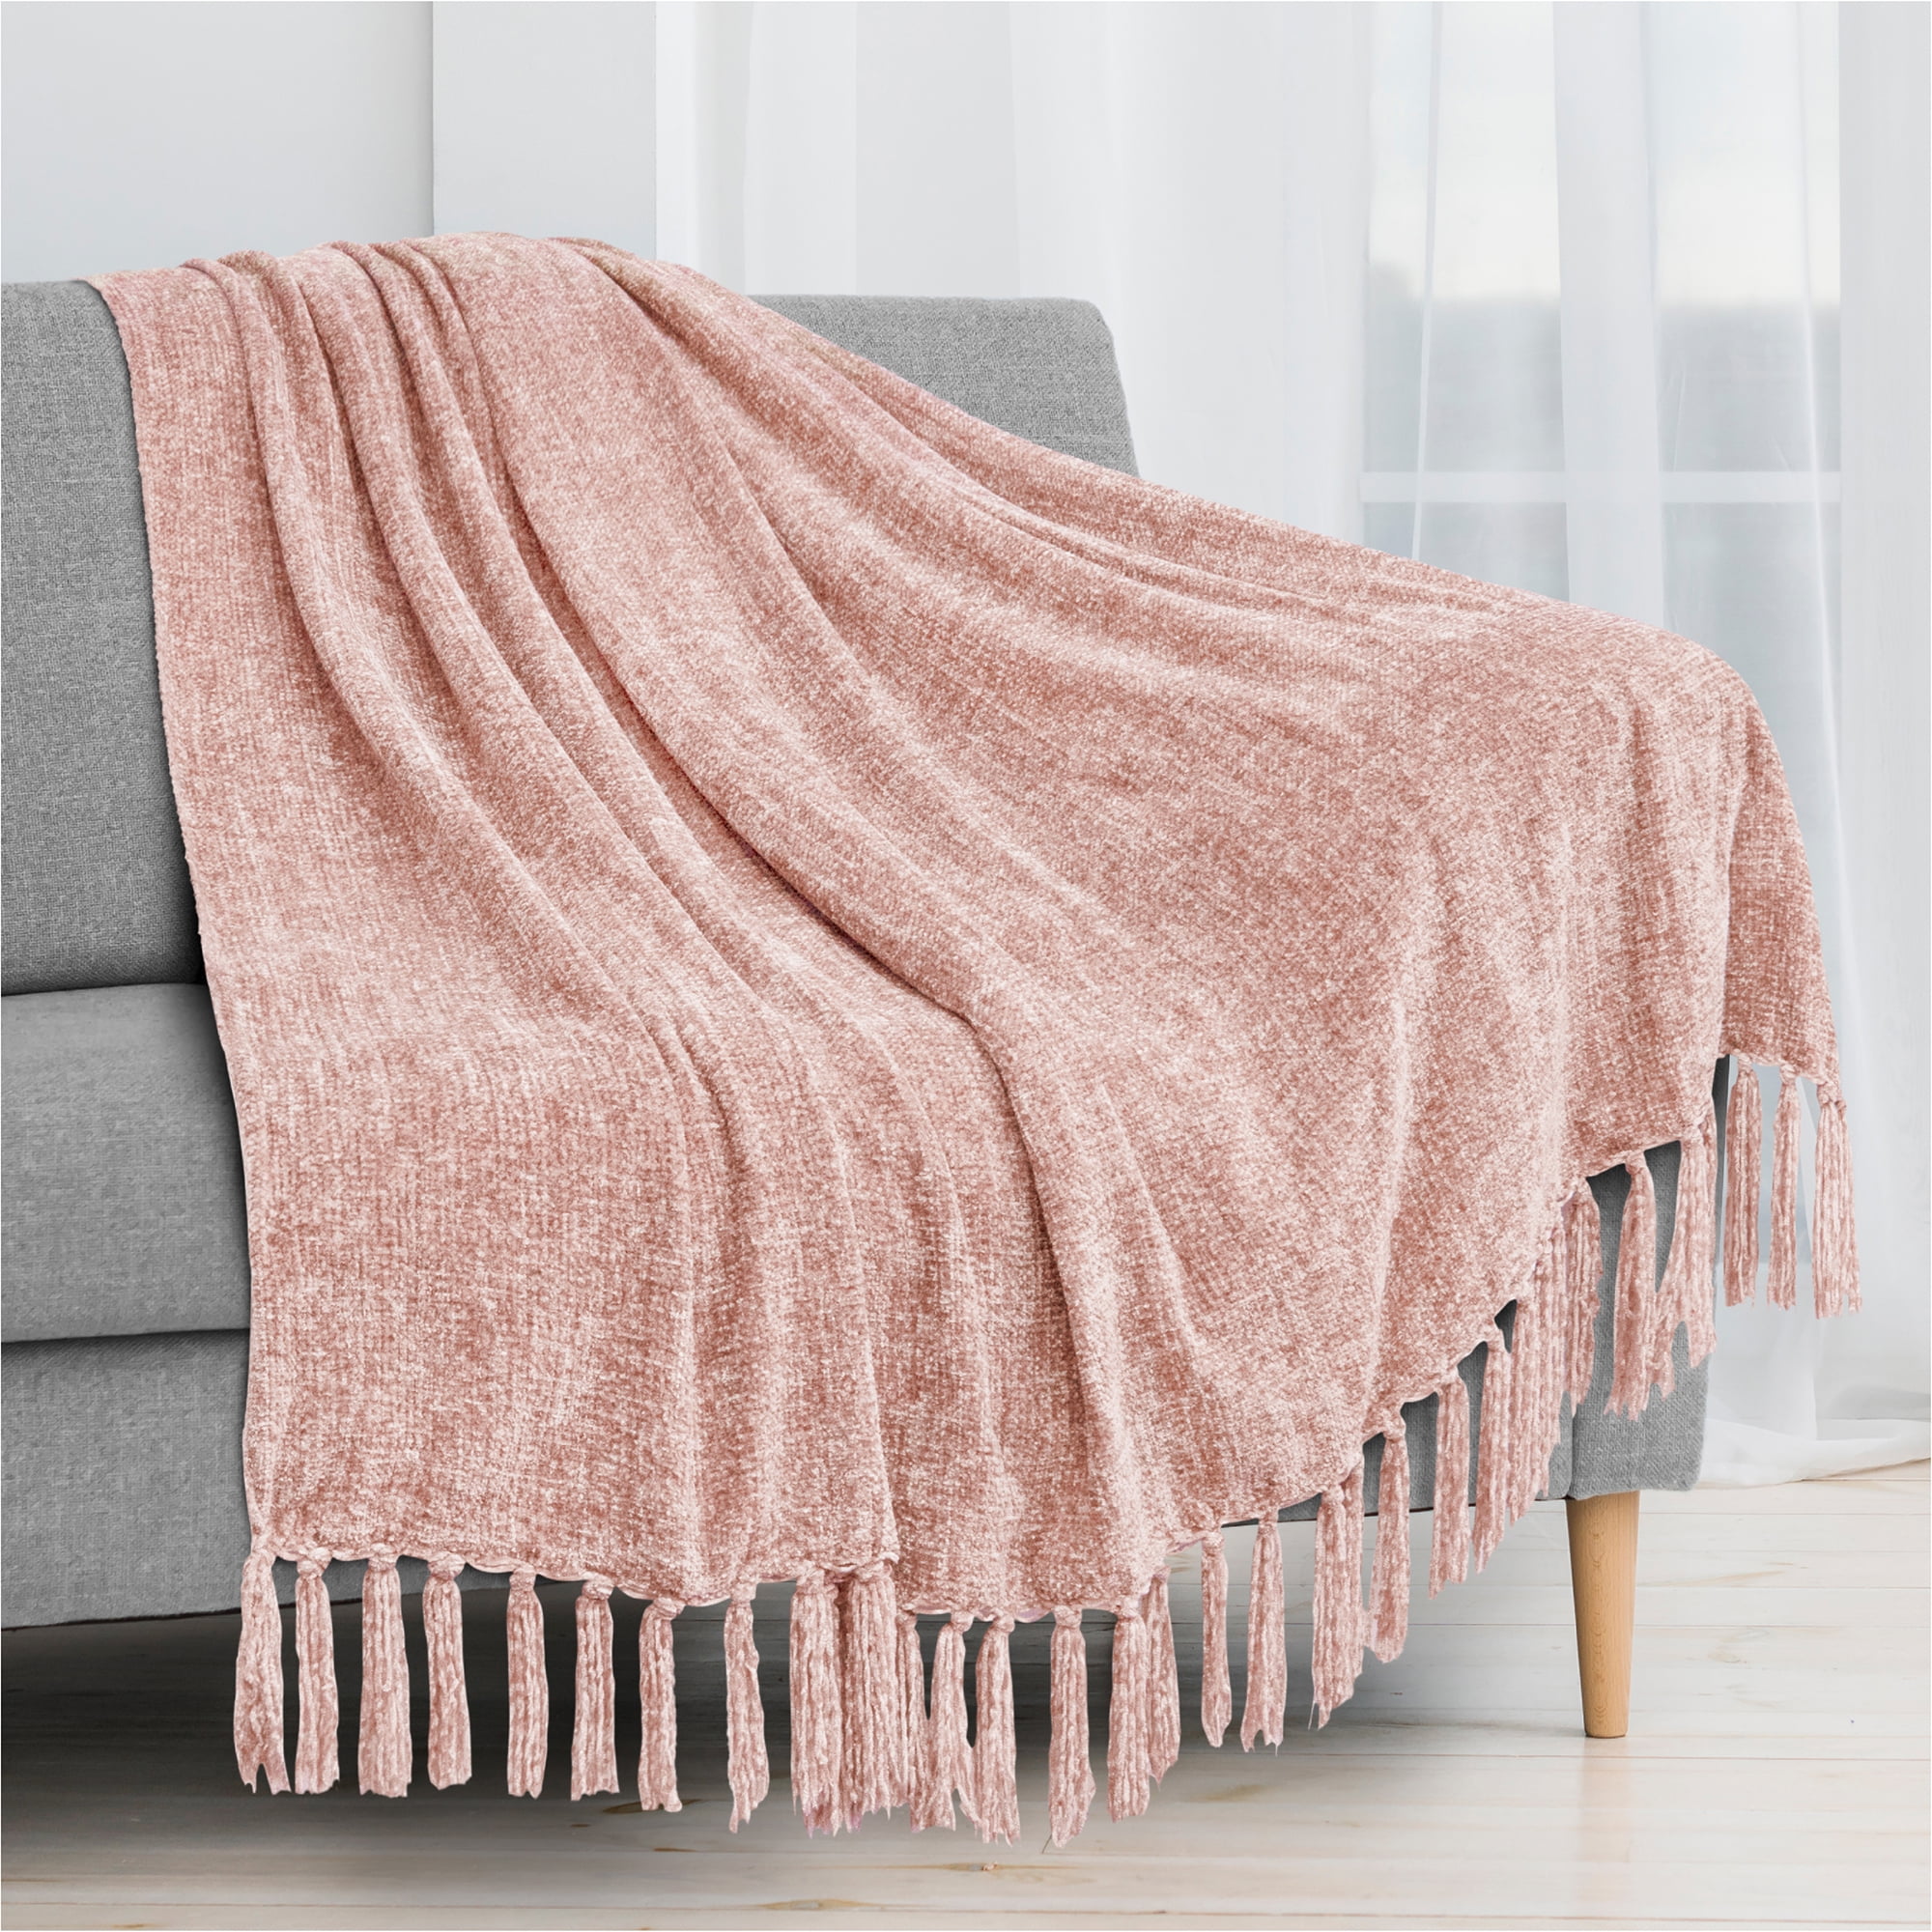 Red/Green color Woven Popcorn Texture Knit Throw Blanket With Ball Fringe